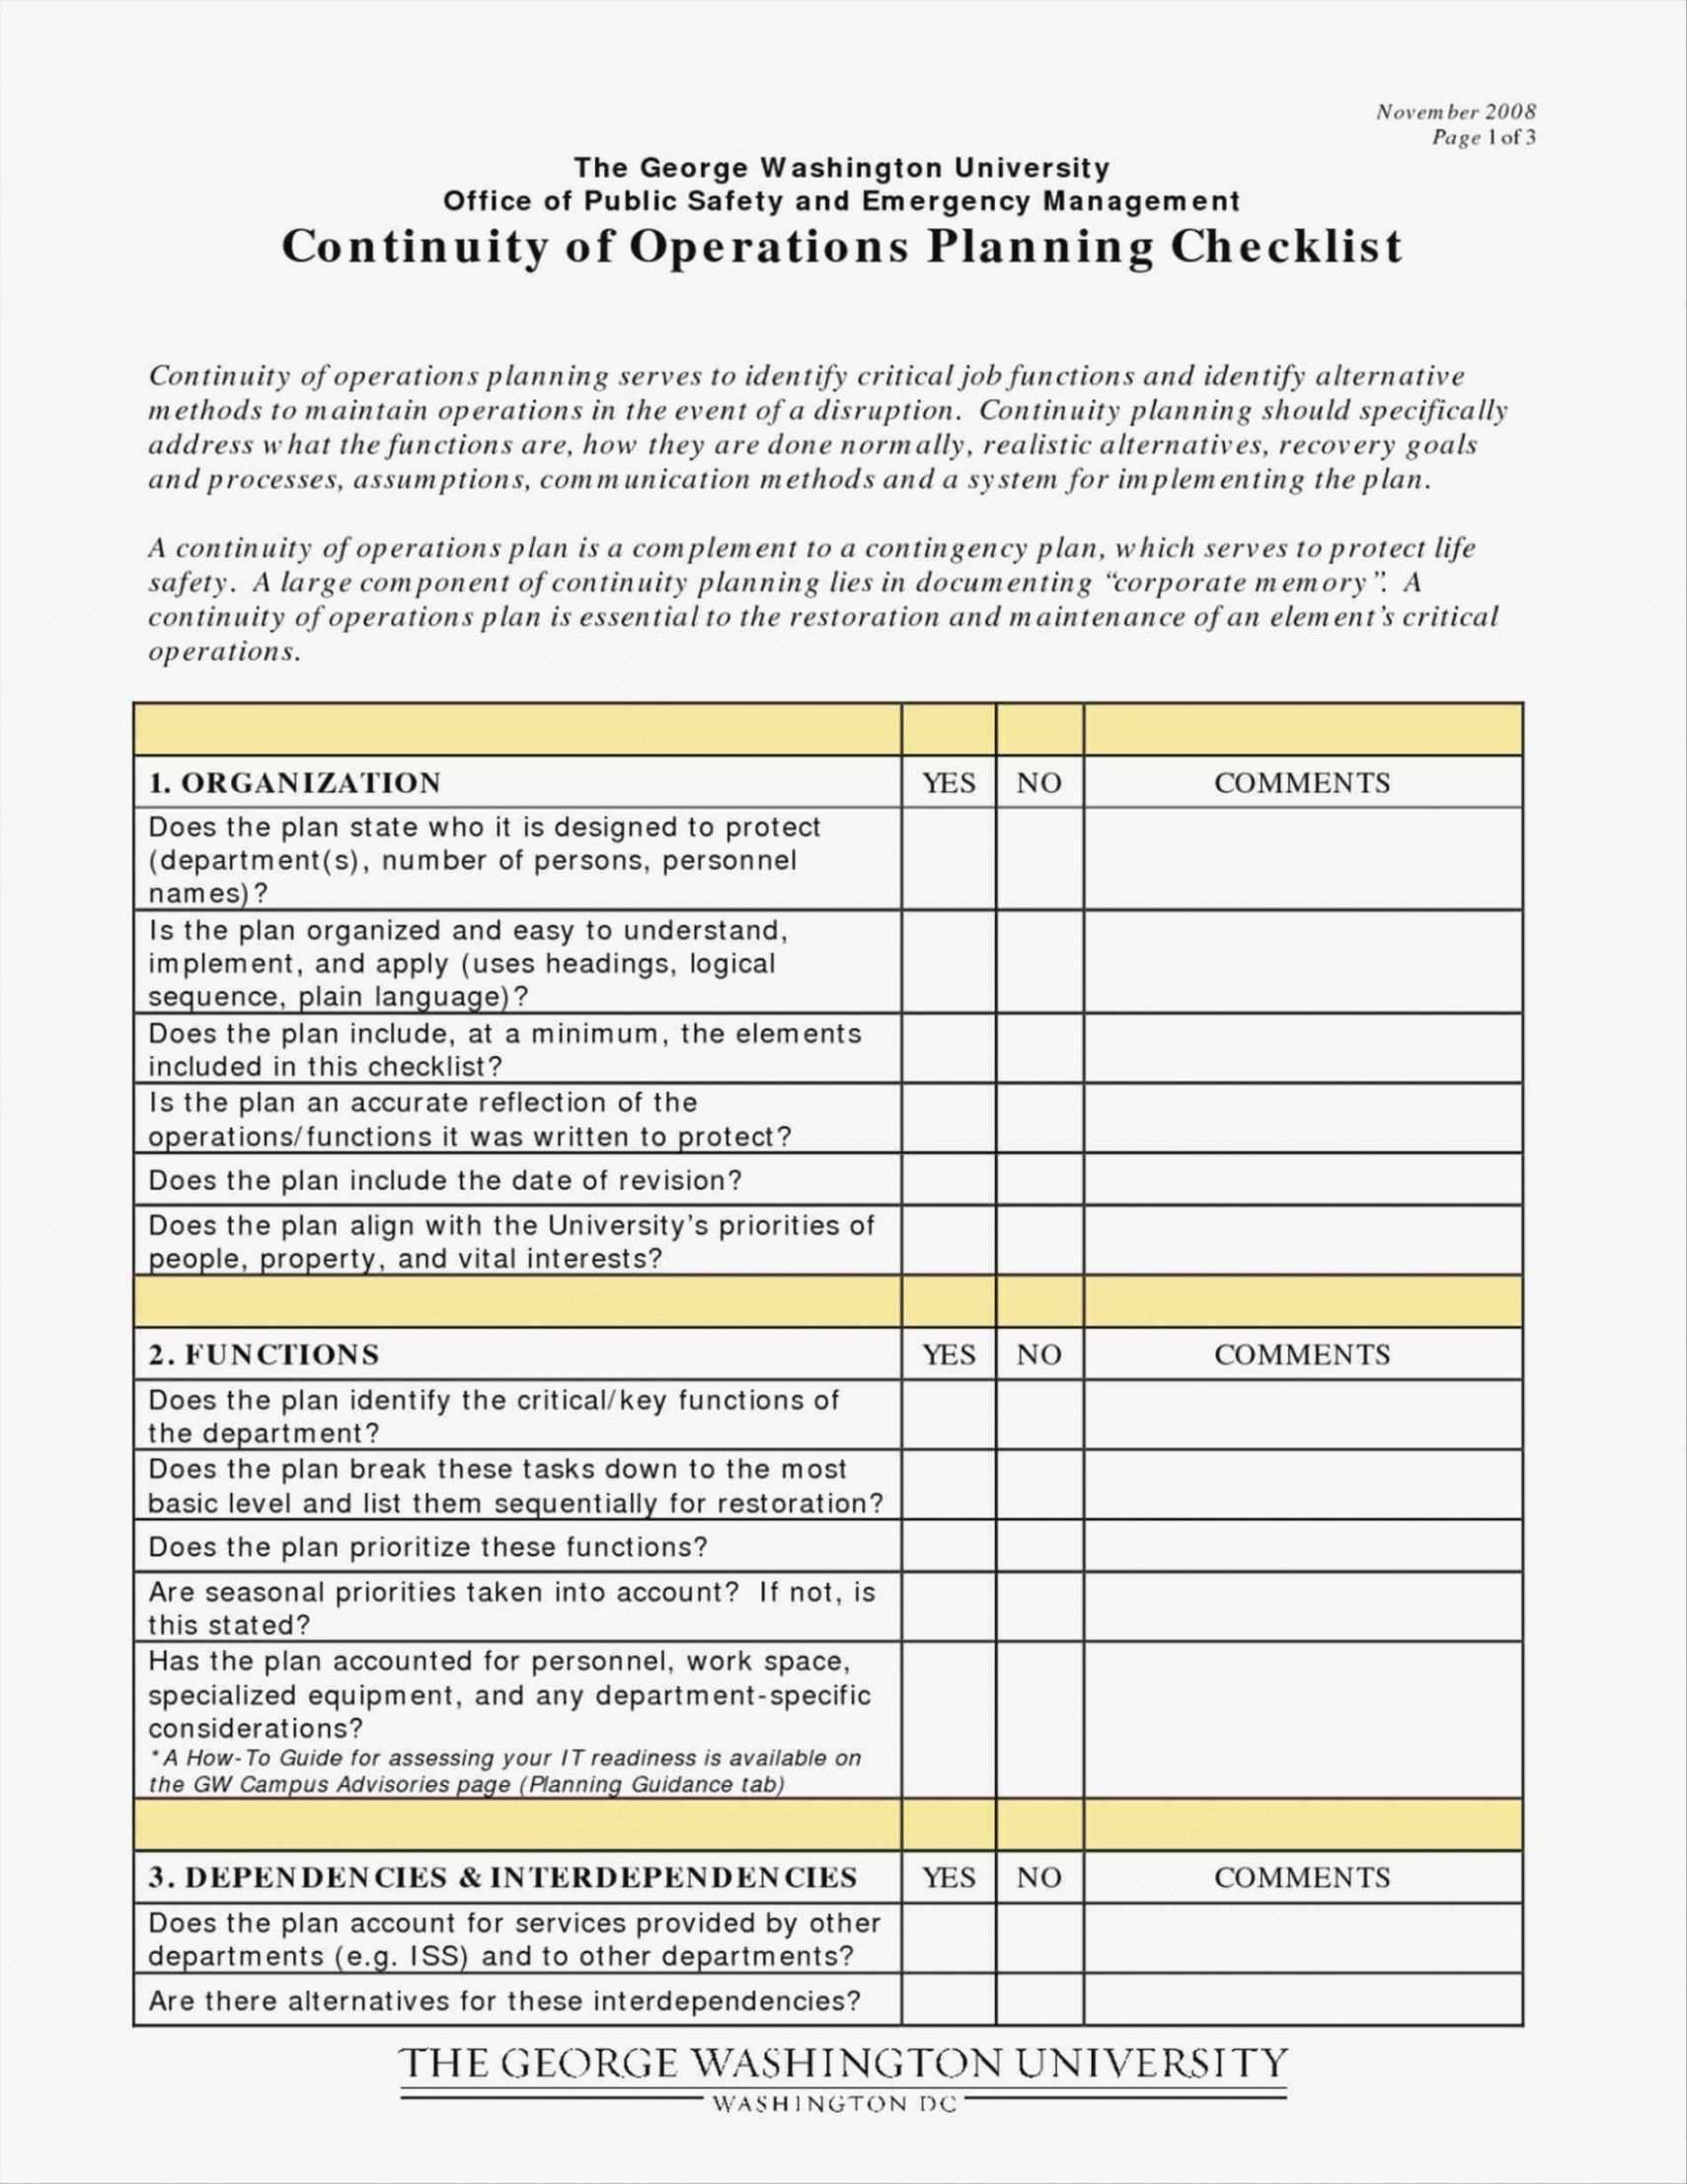 Get Our Image Of Warehouse Safety Inspection Checklist Template Business Continuity Planning Business Continuity Business Contingency Plan